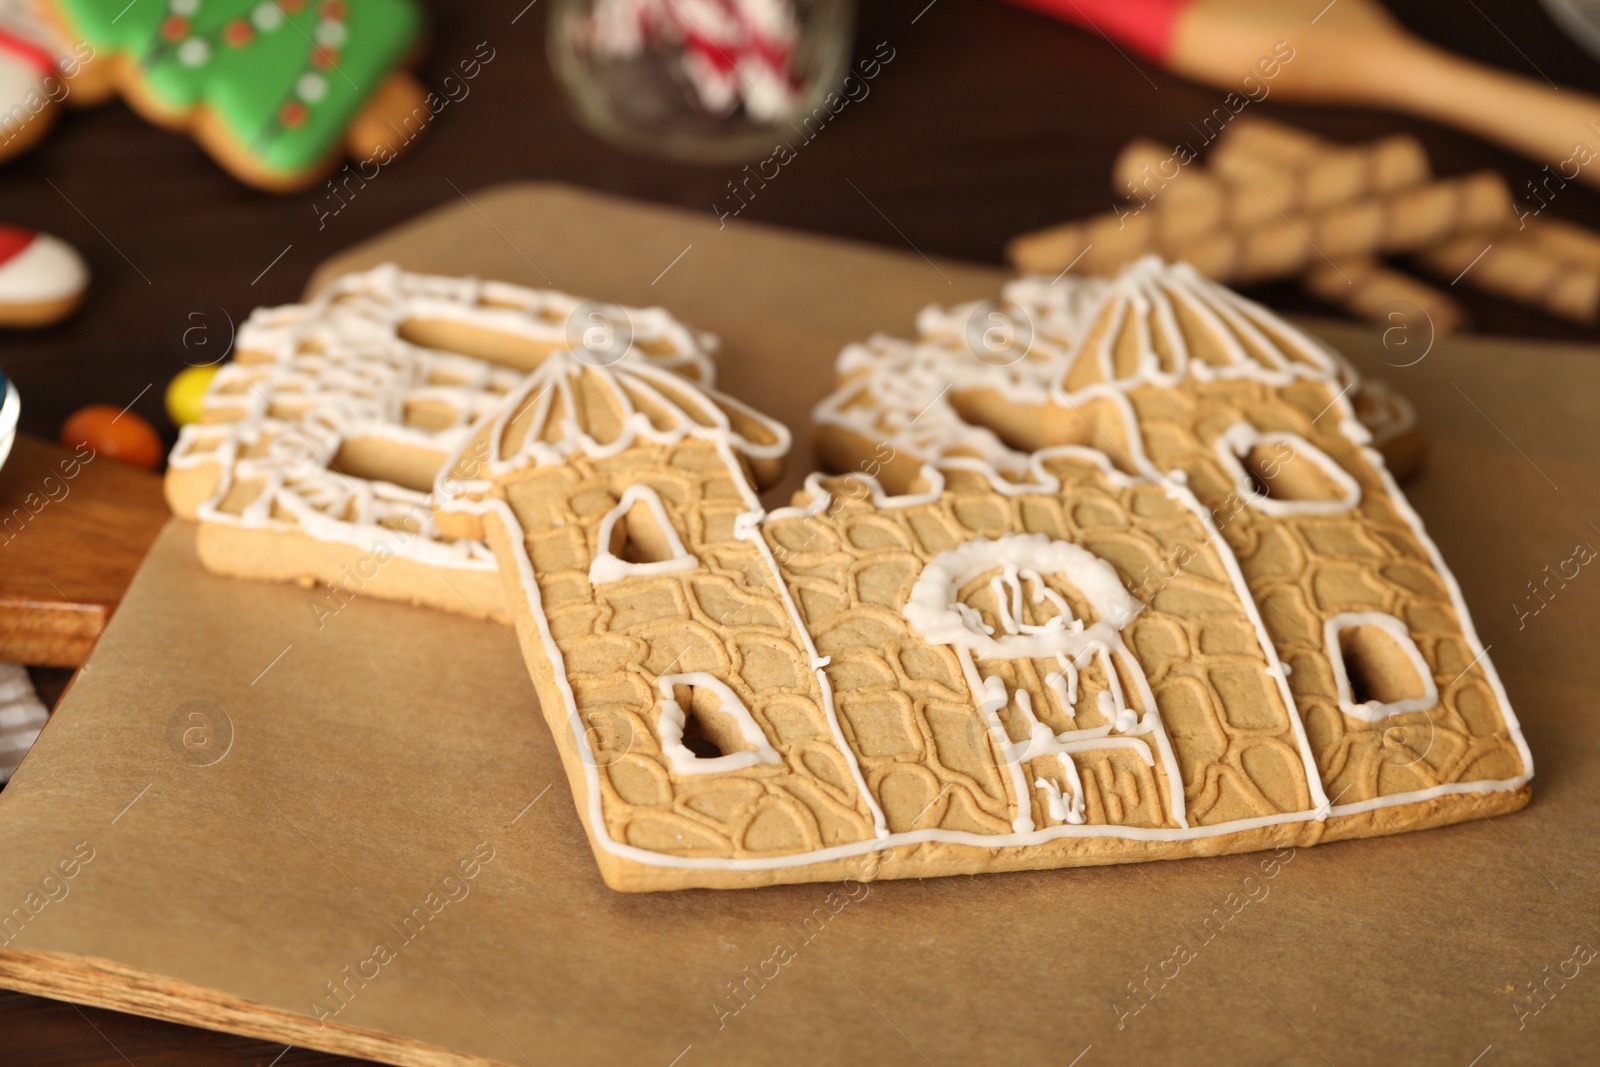 Photo of Parts of gingerbread house on parchment, closeup